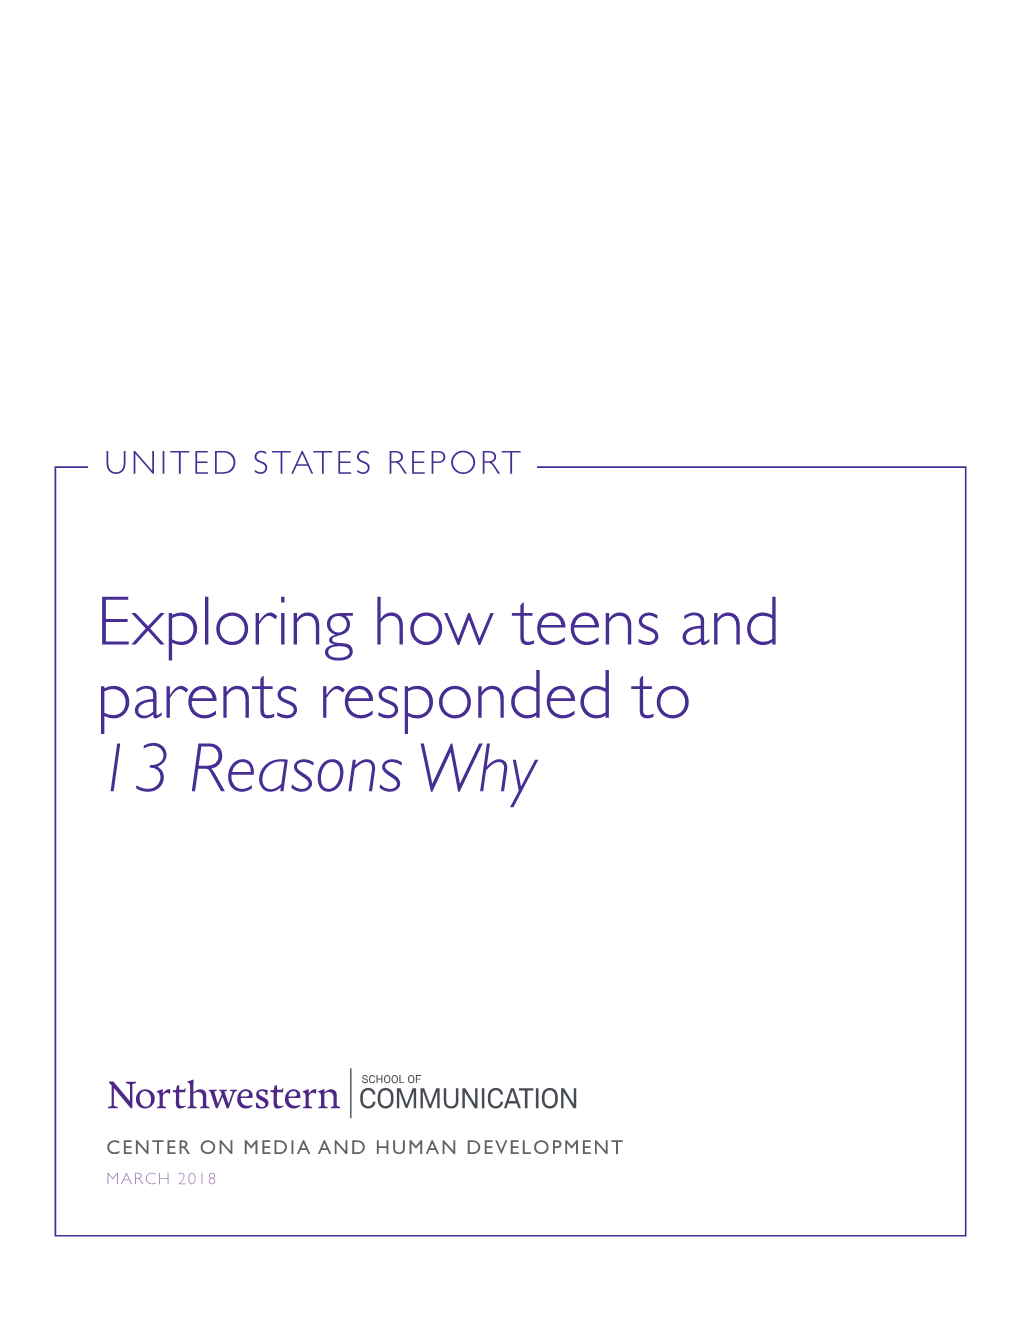 Exploring How Teens and Parents Responded to 13 Reasons Why